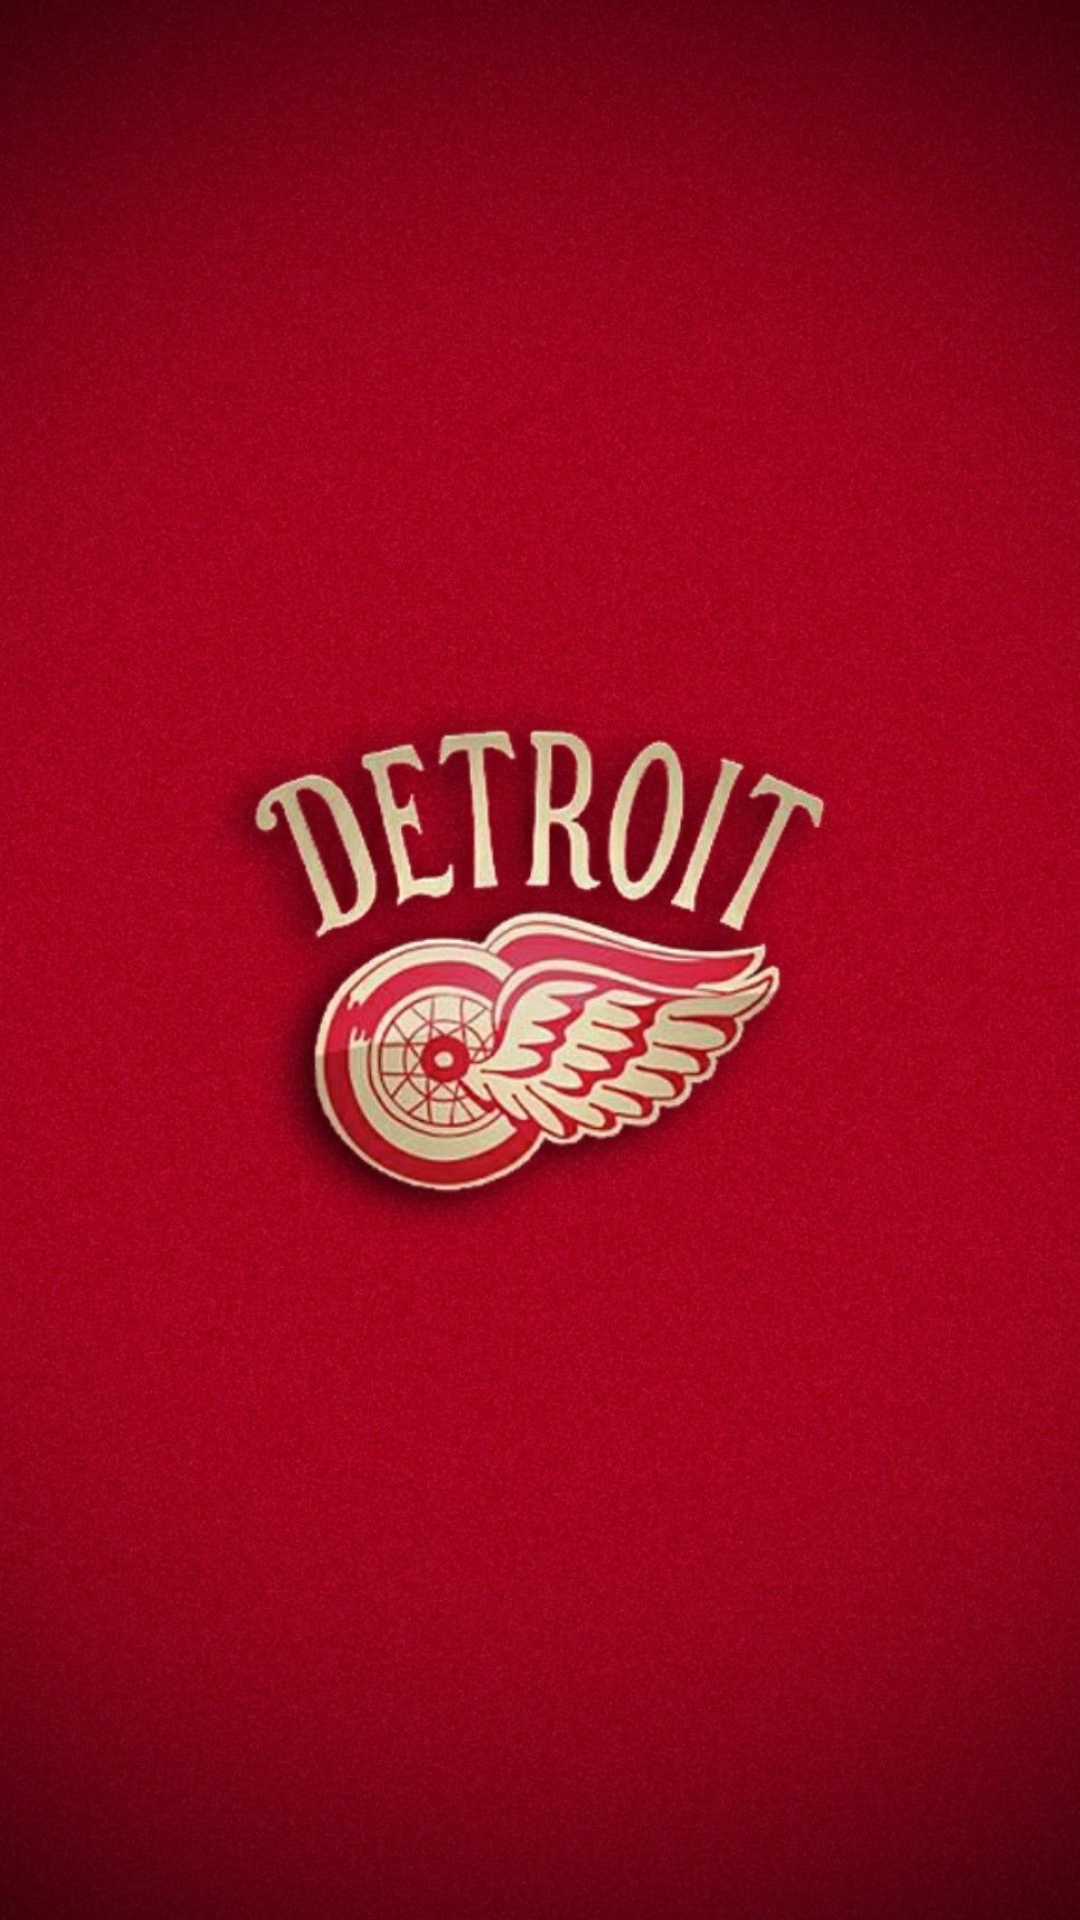 1080x1920 Pin by Chad Gardiner on my sports teams/sports stuff/sportsplayers | Detroit red wings, Sports wallpapers, Red wings hockey